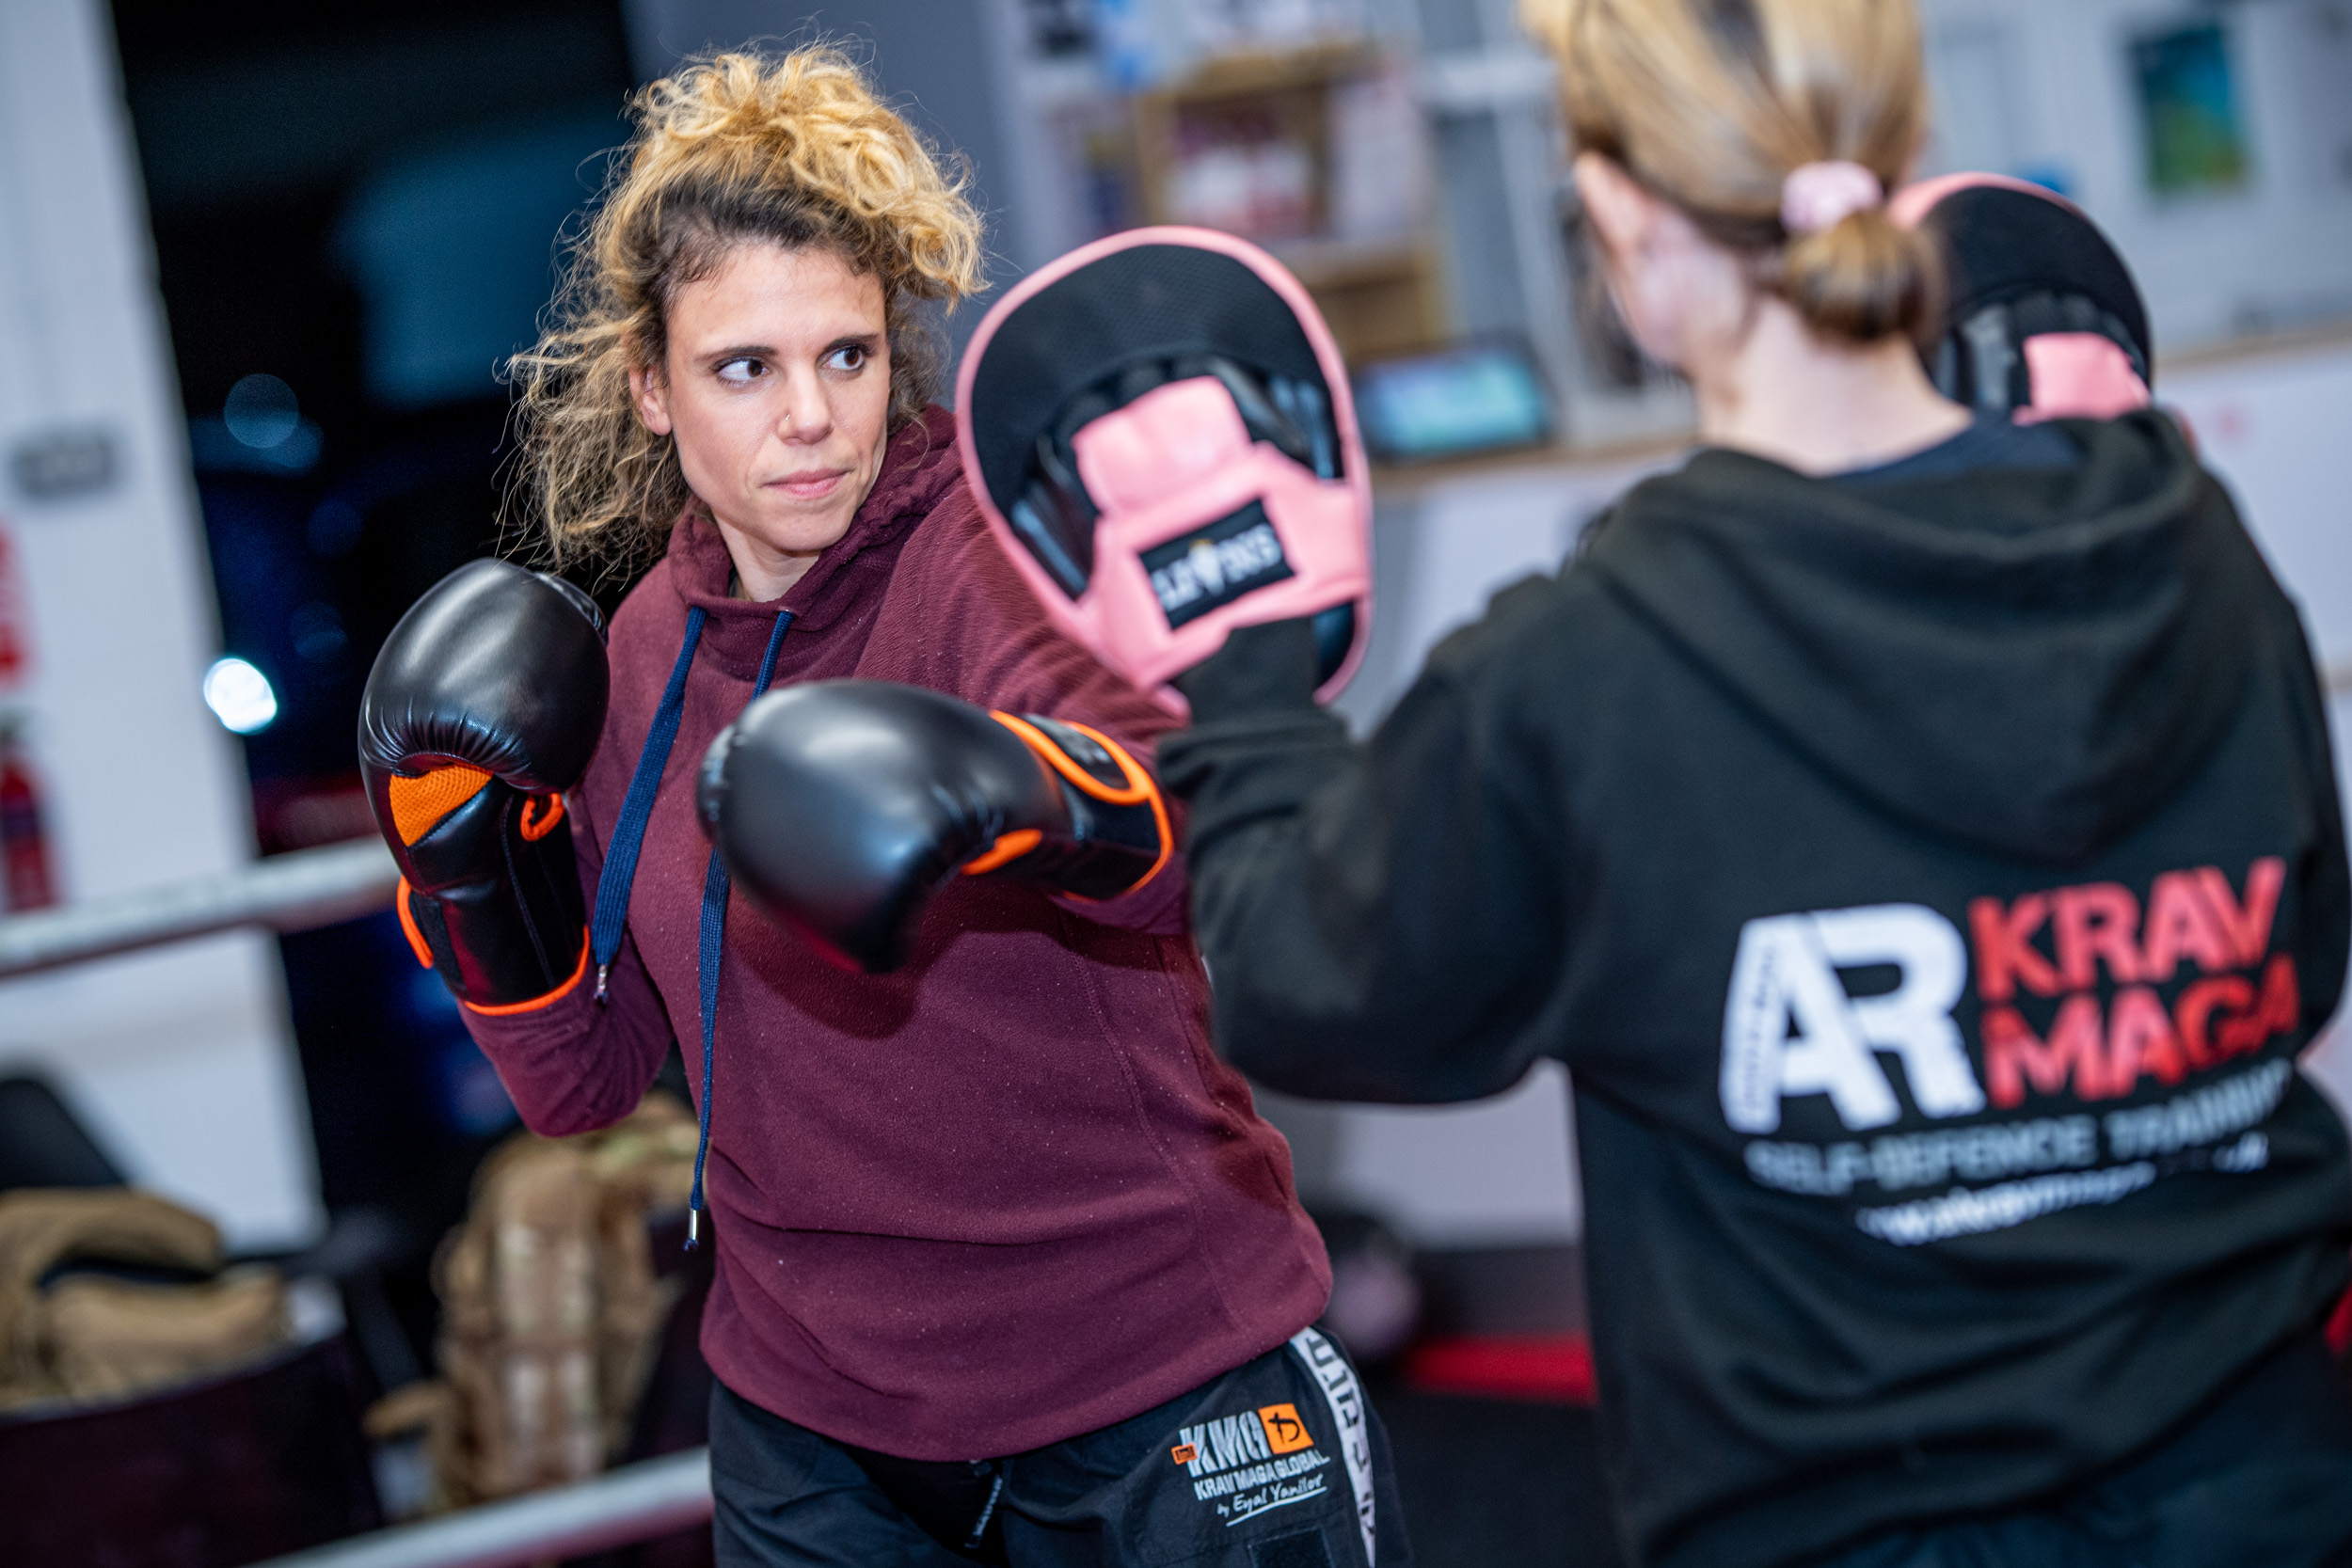 2 Adult Self-defence Trial Classes